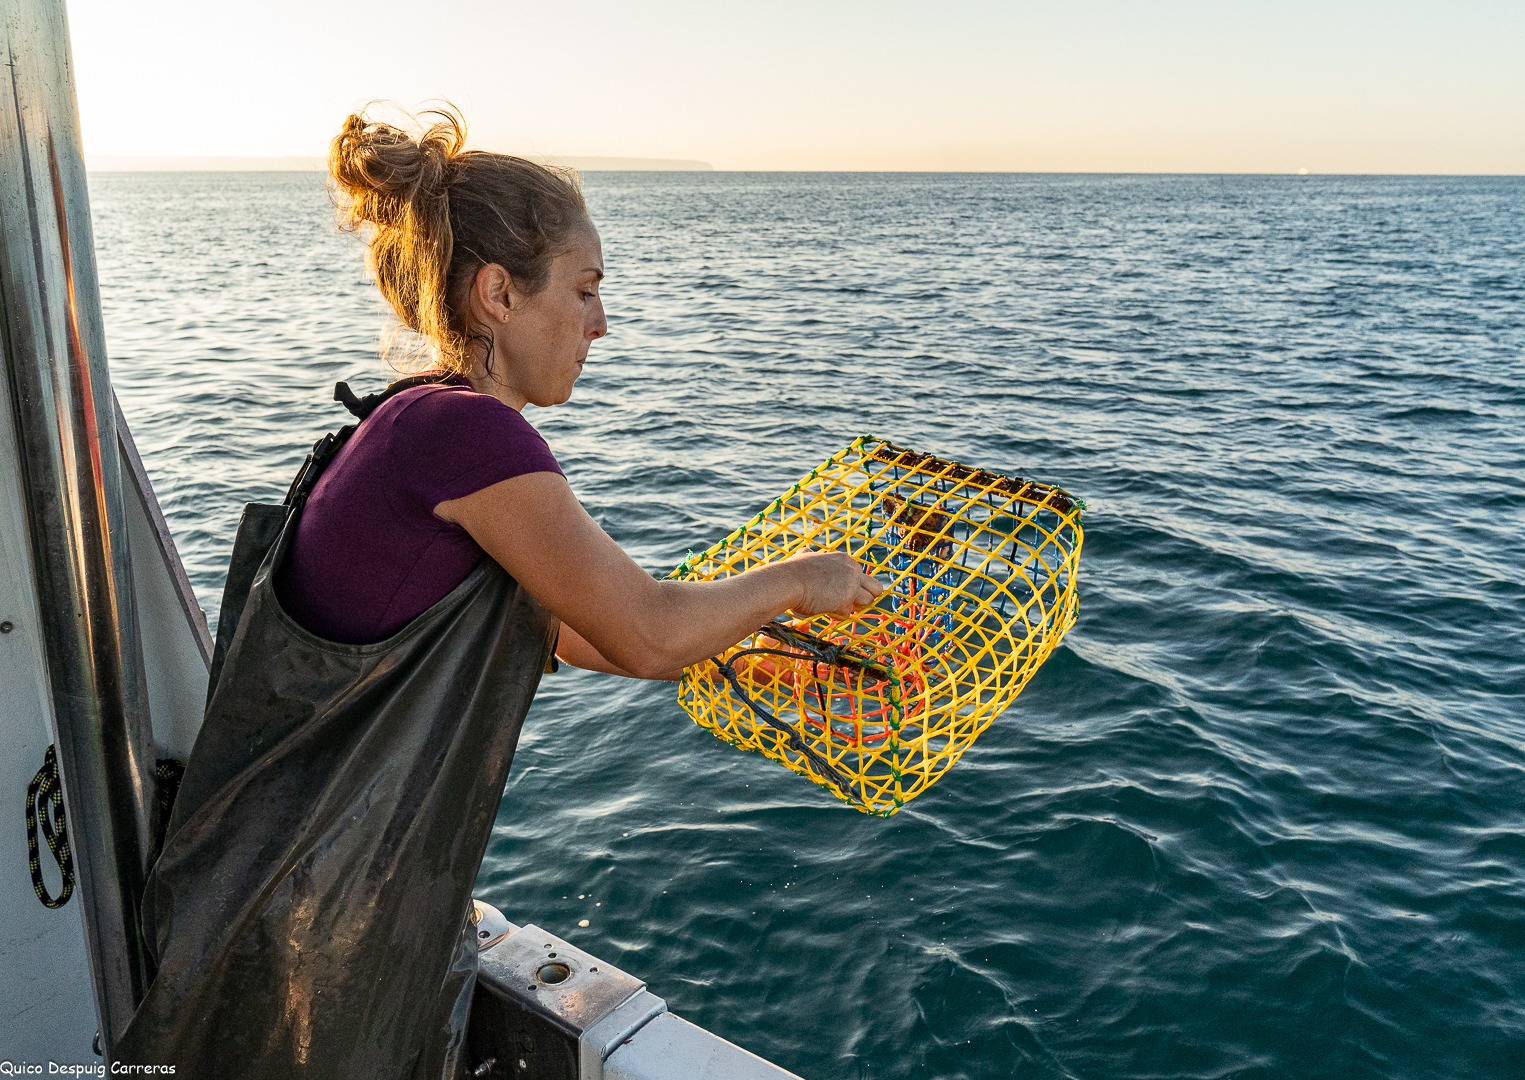 "Scientists and fisheries can work together to manage resources in a sustainable way"